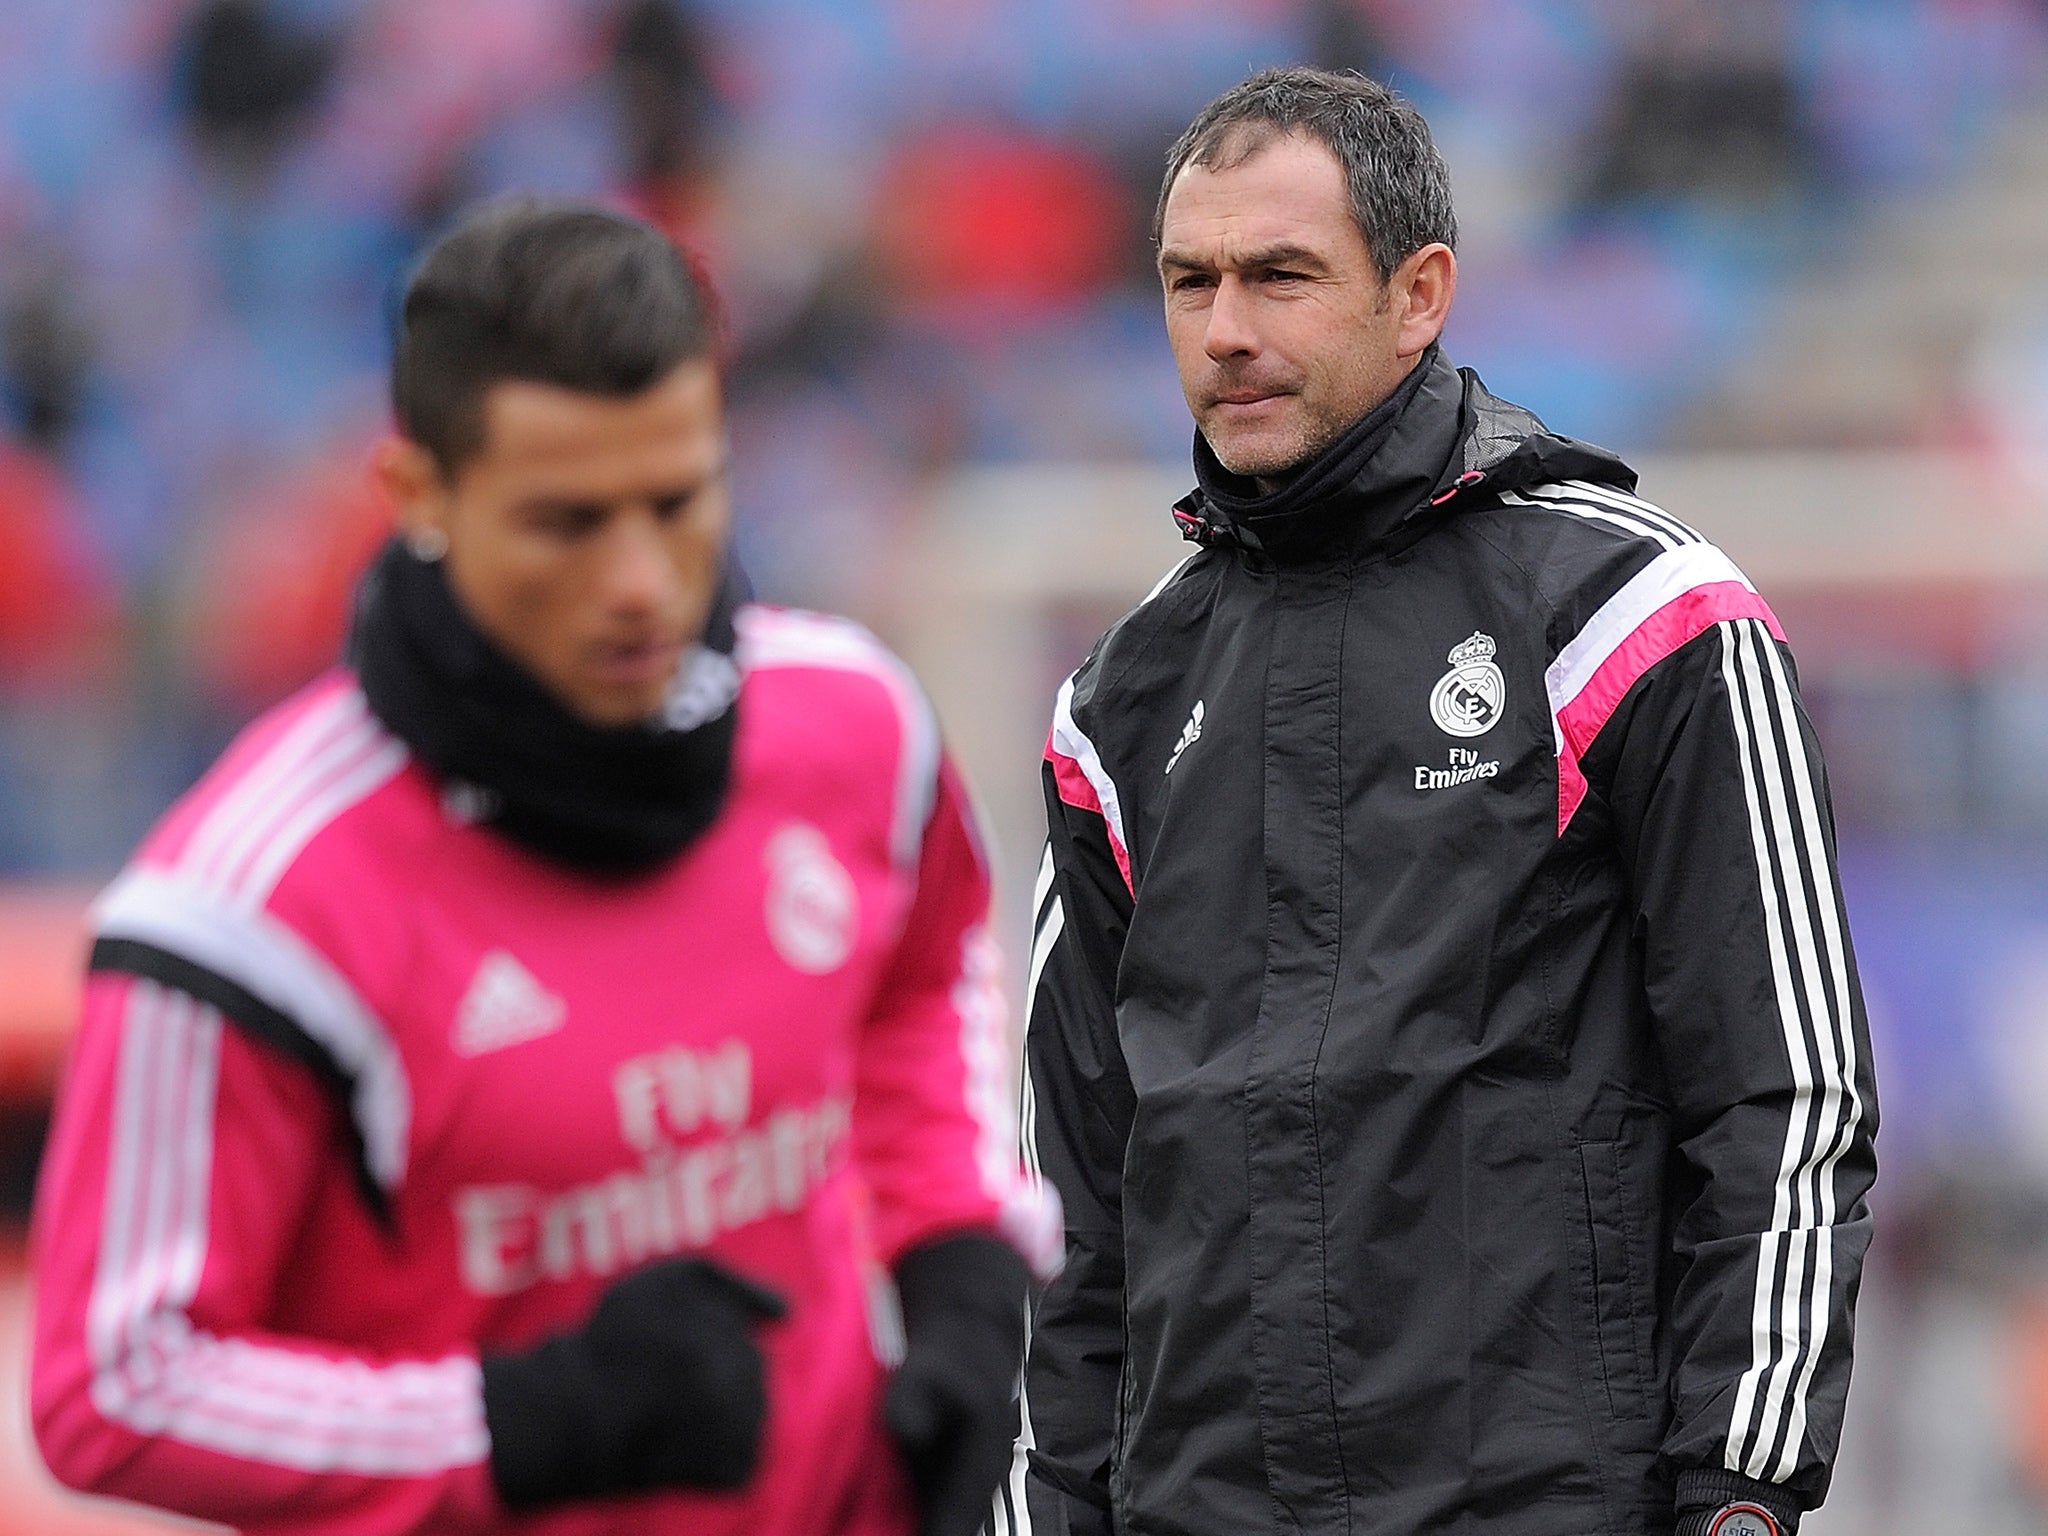 Paul Clement's future is tied to Ancelotti's - he will not stay if the Italian leaves